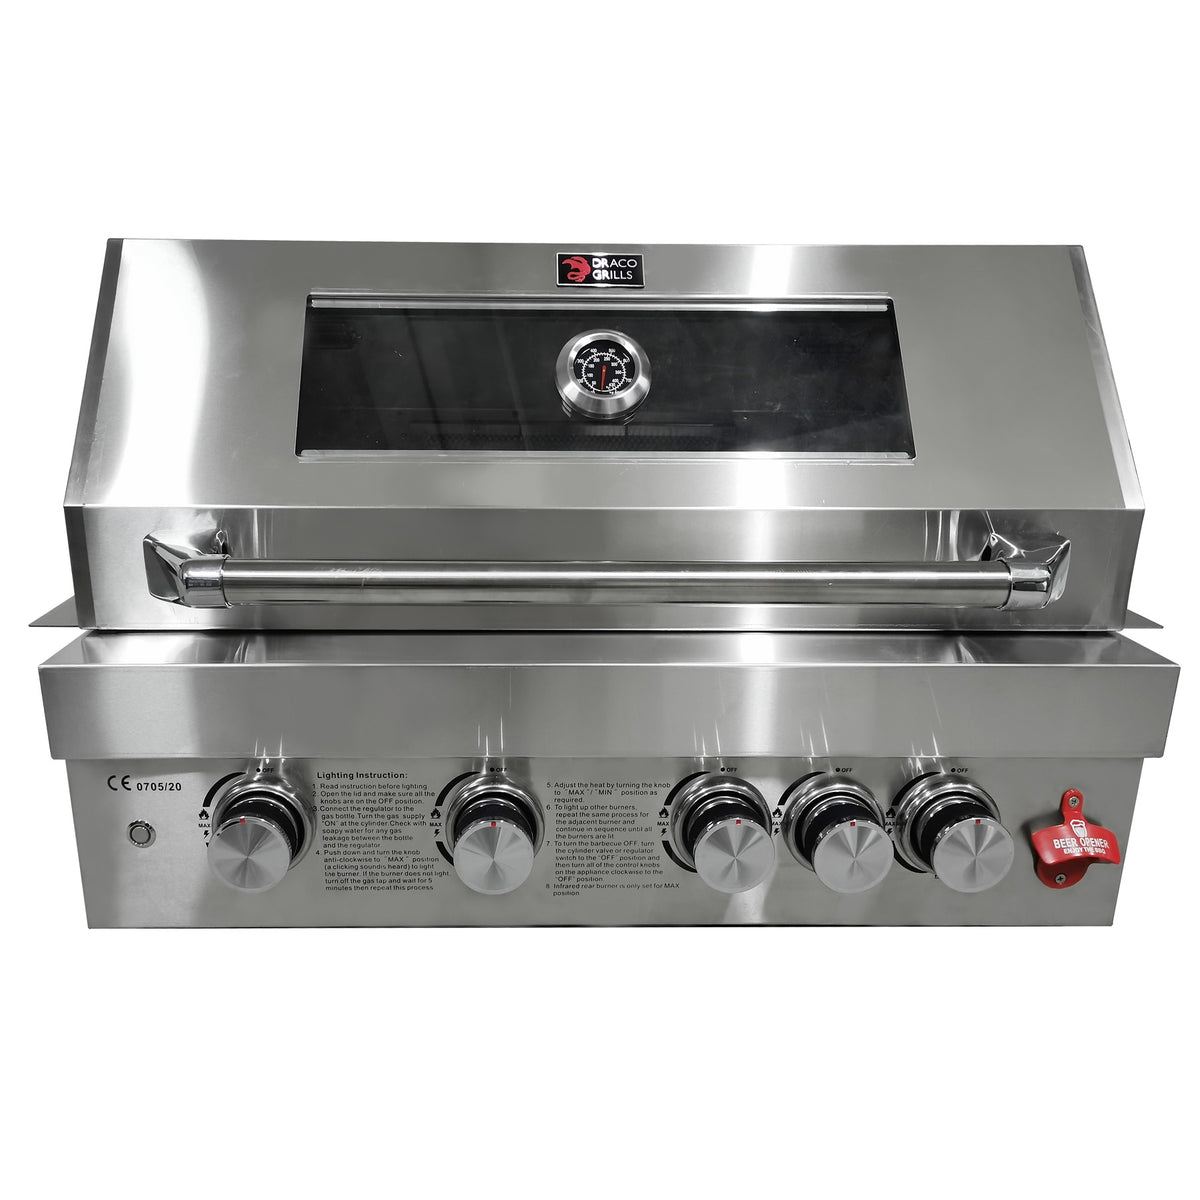 Draco Grills Z440B Deluxe 4 Burner Stainless Steel Build In Gas Barbecue